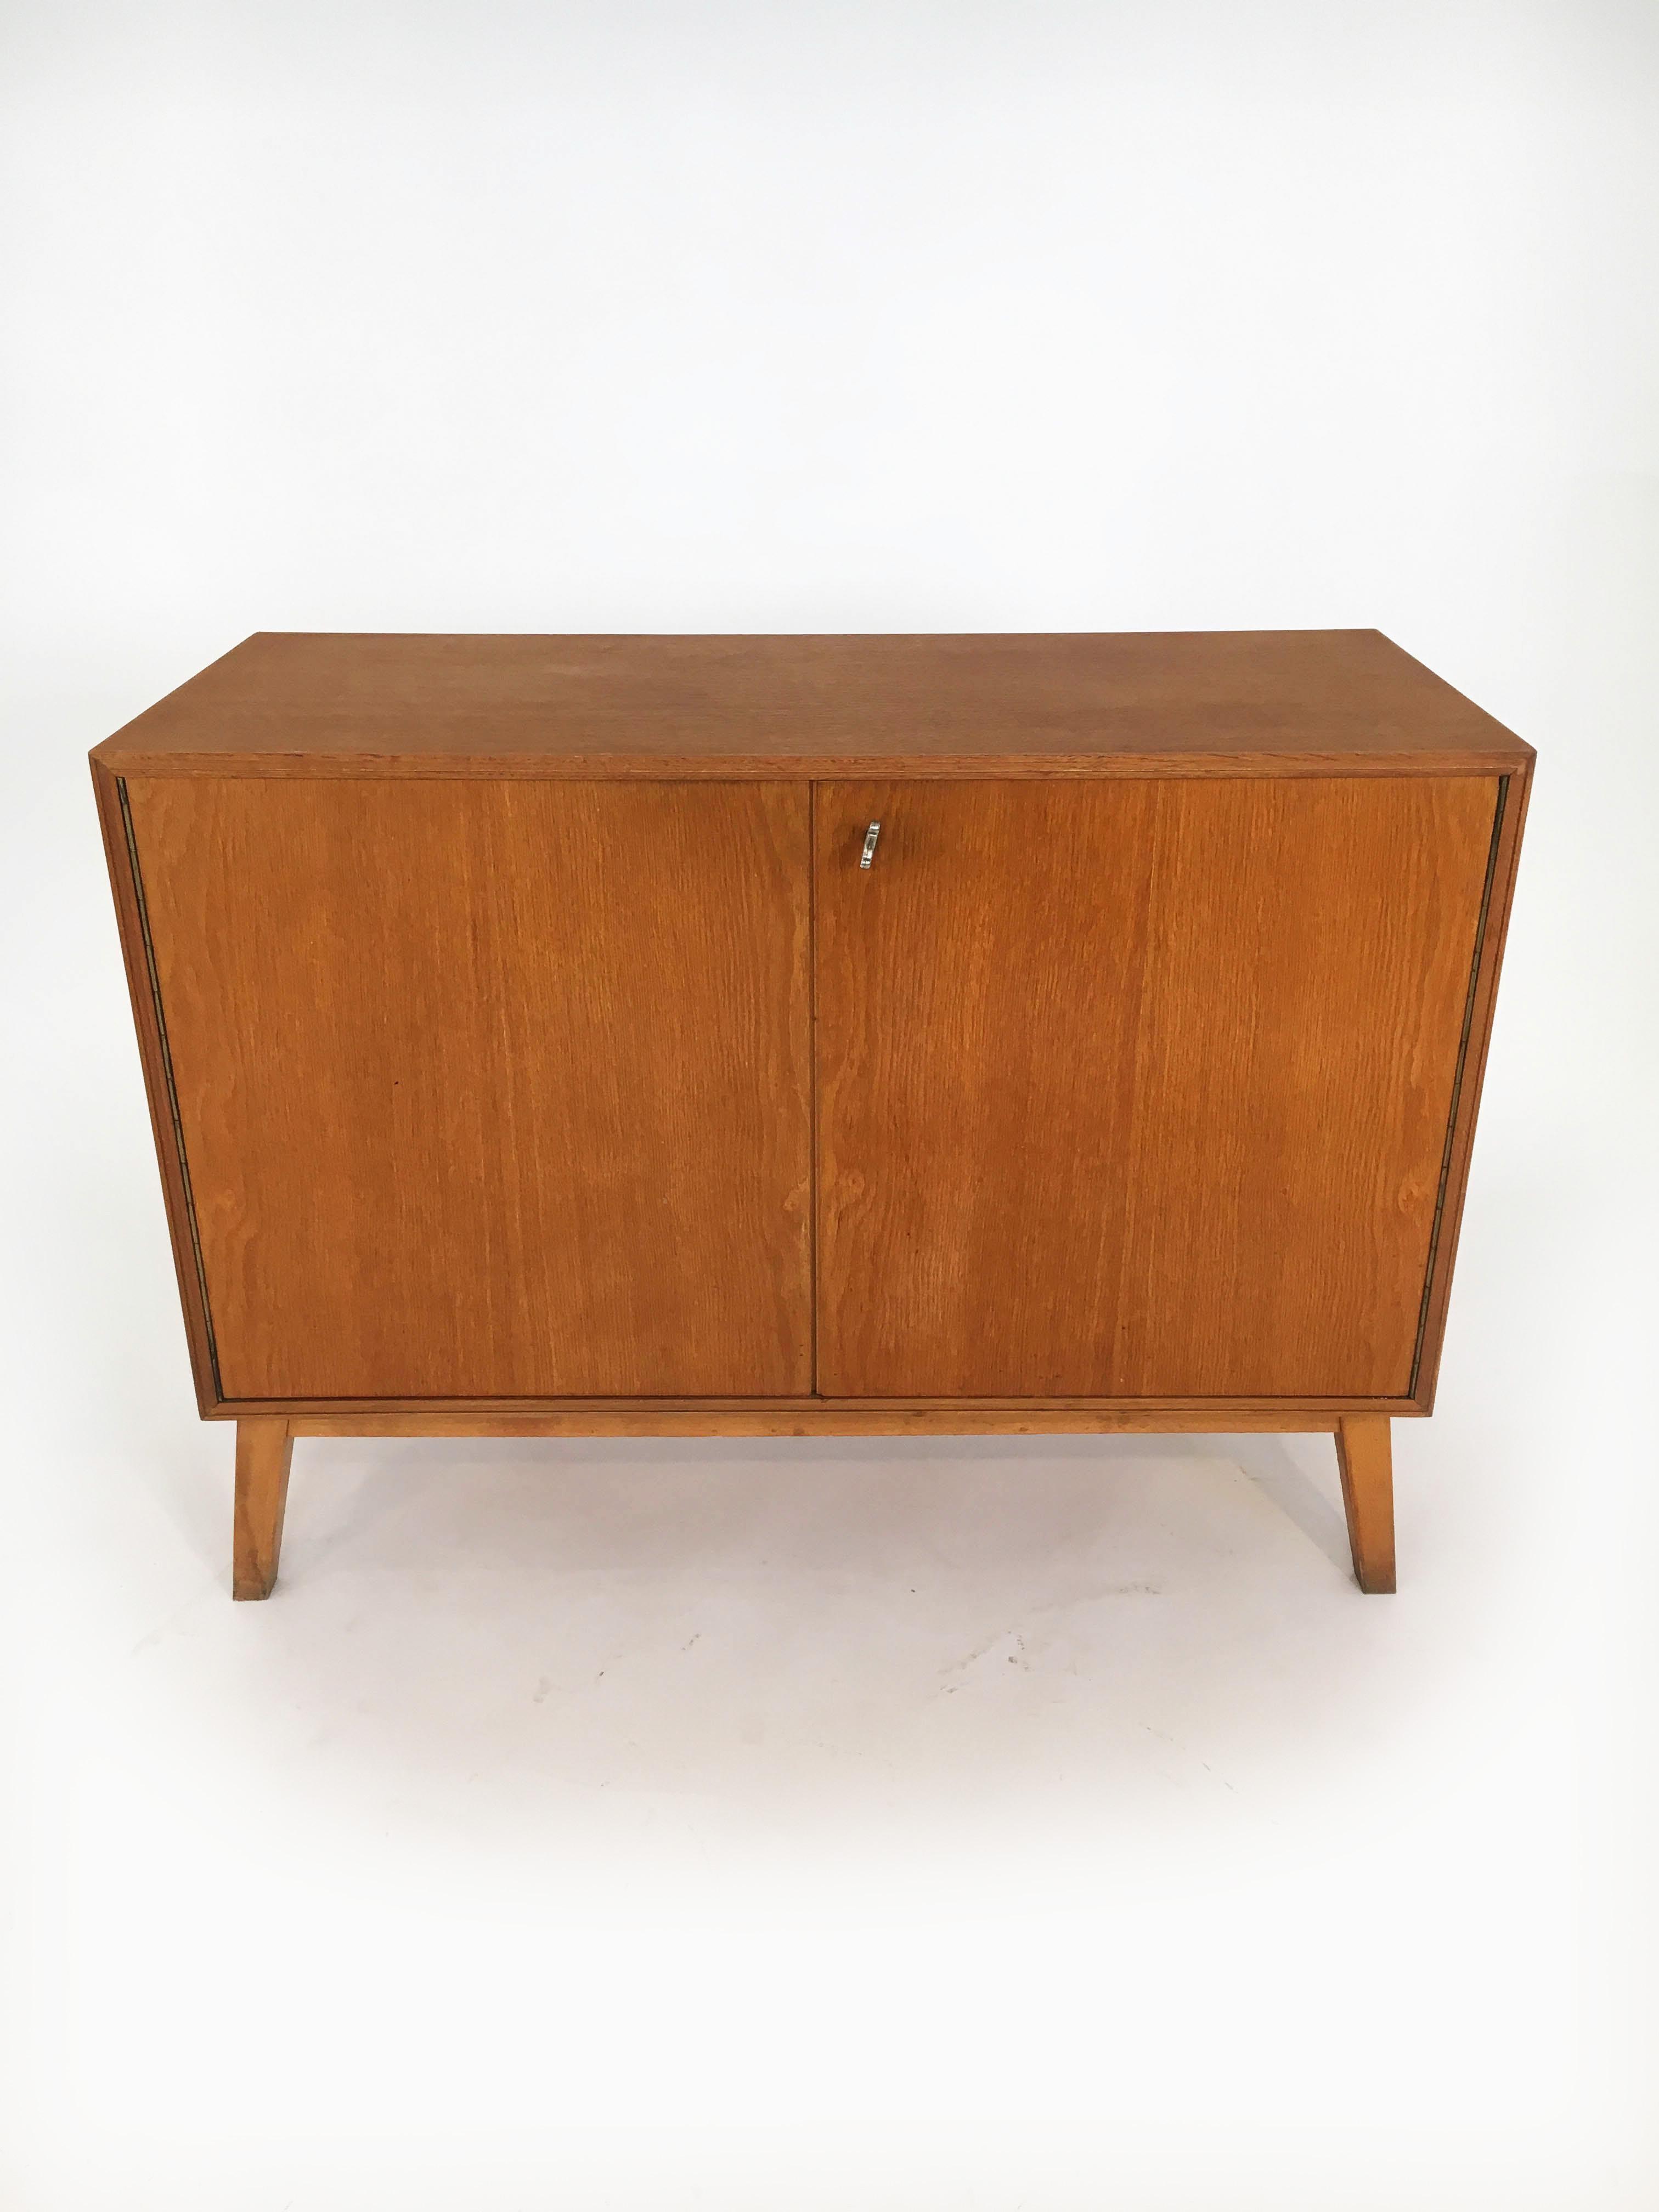 SW Möbel credenza Vienna, 1950s. SW Möbel (Soziale Wohnkultur) was a furniture brand of the 1950s, created to provide modern functional furniture at affordable prices for small apartment in Vienna Austria. Developed by leading Austrian architects